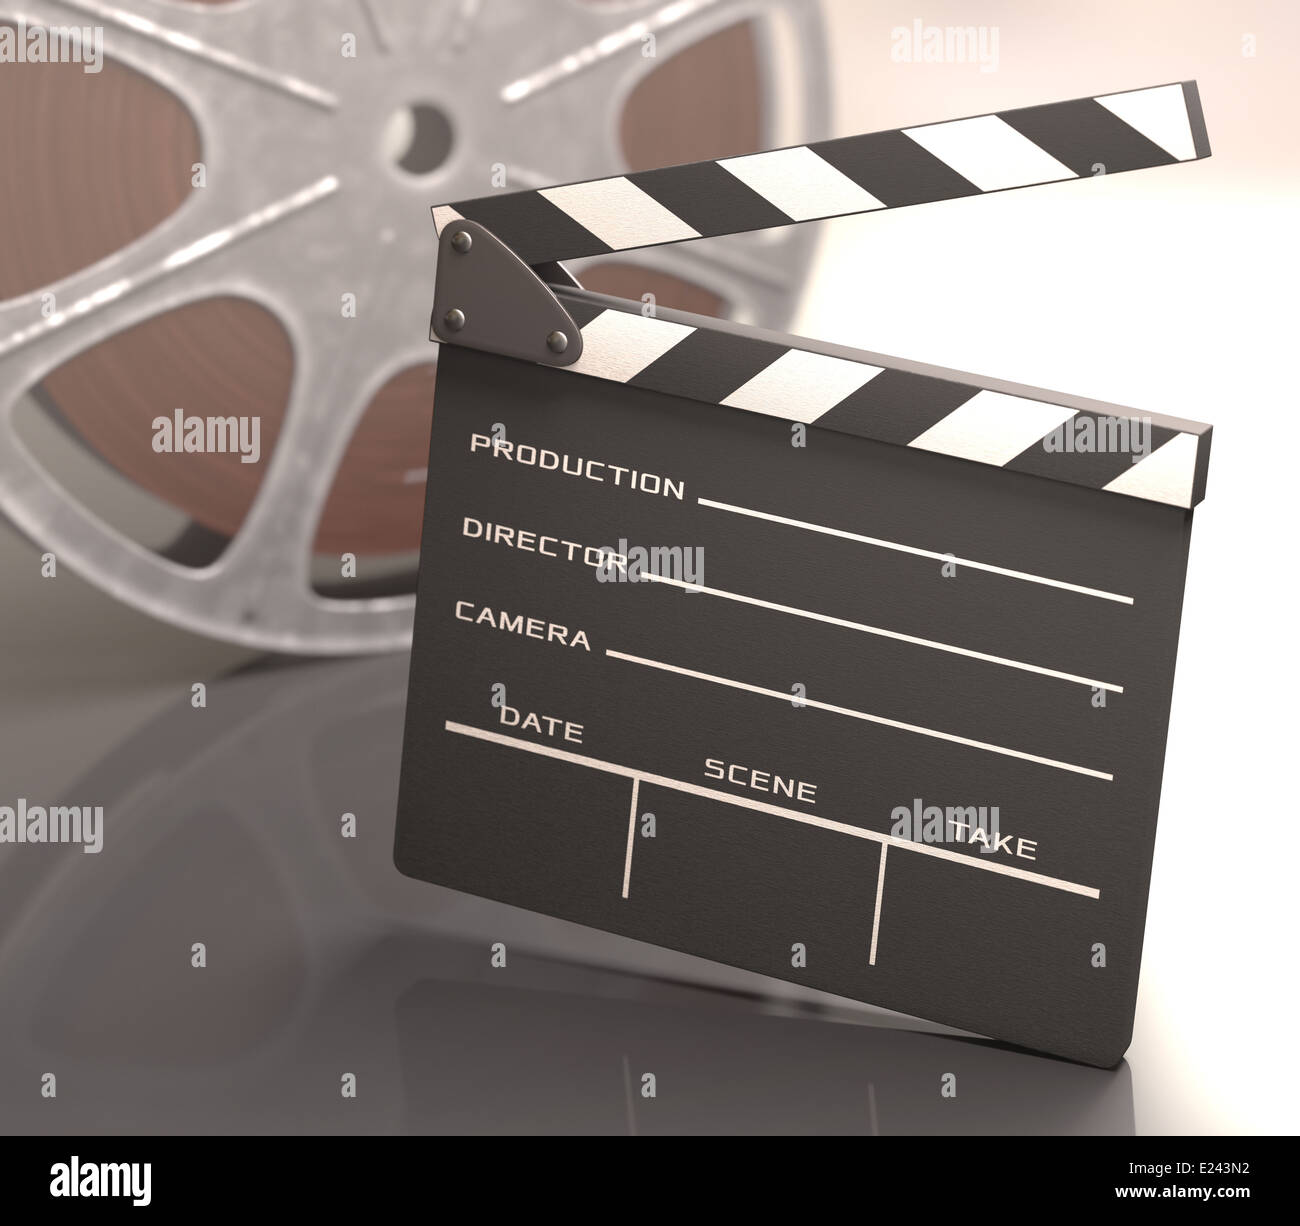 Clapboard on a reflective table with a roll of film on background. Stock Photo